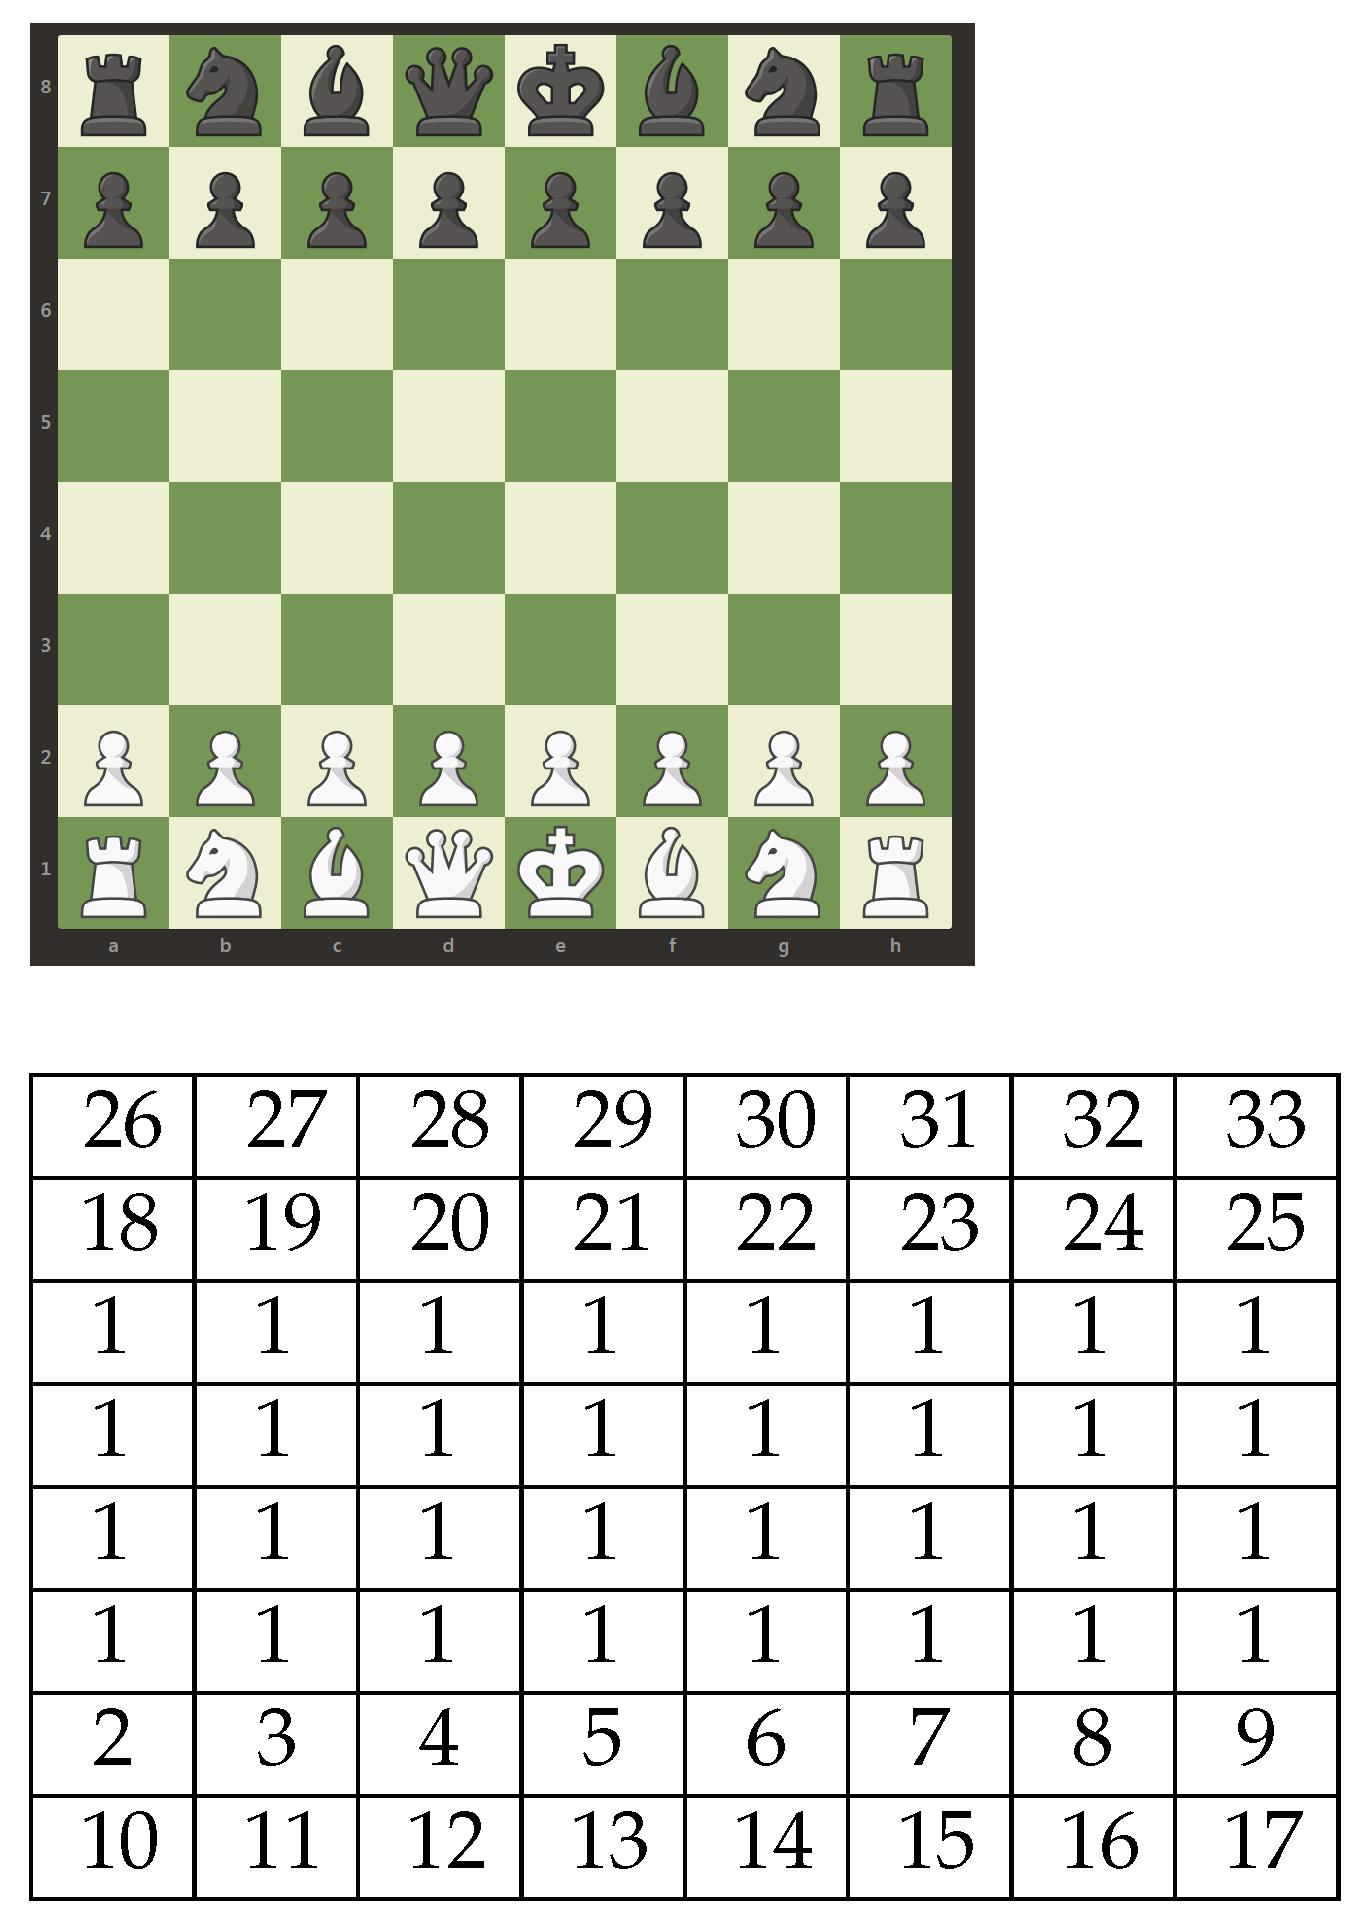 How chess plays out at MIT, MIT News